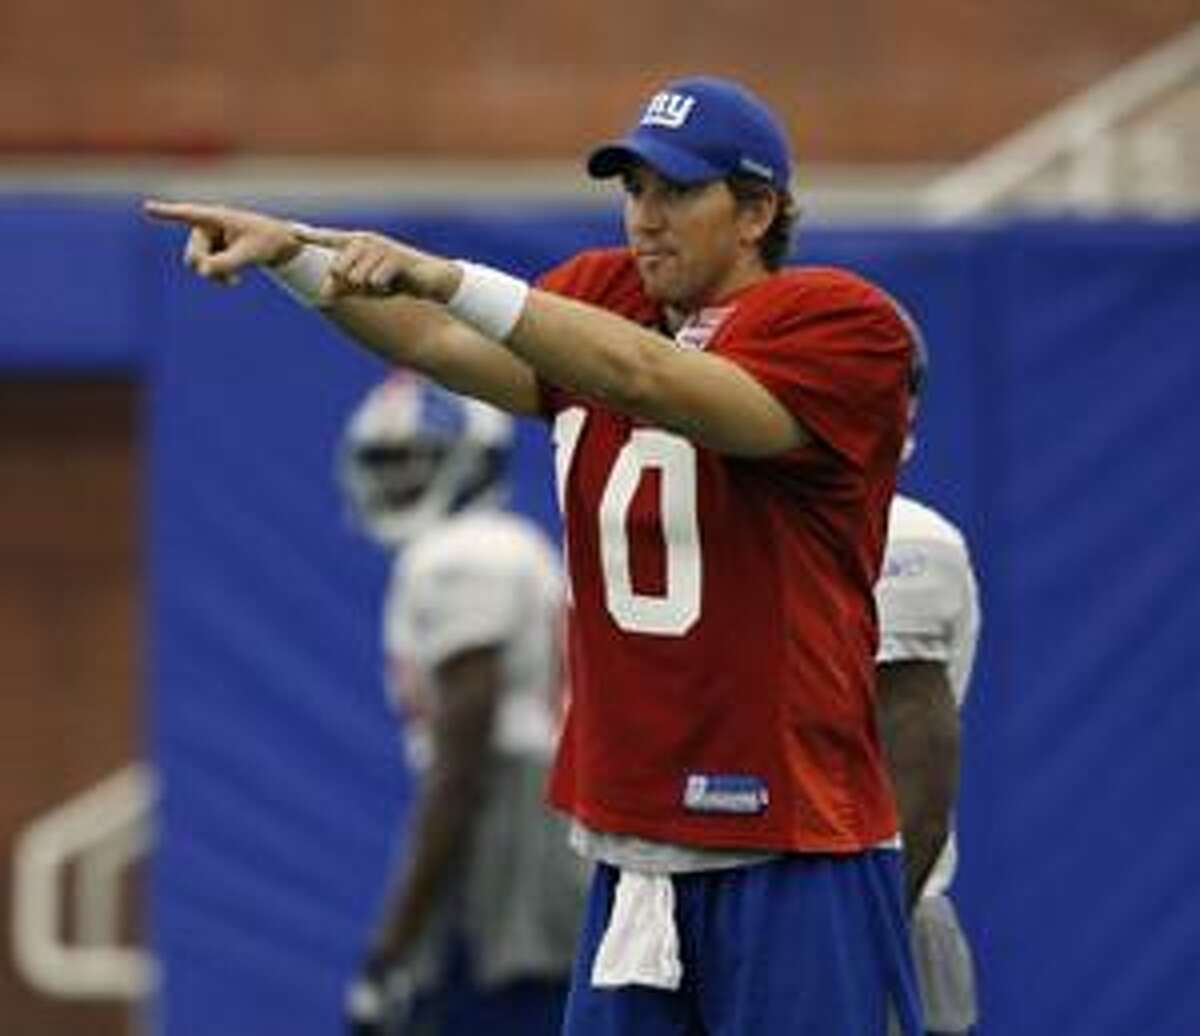 AP Injured New York Giants quarterback Eli Manning practices without a helmet Monday in East Rutherford, N.J.